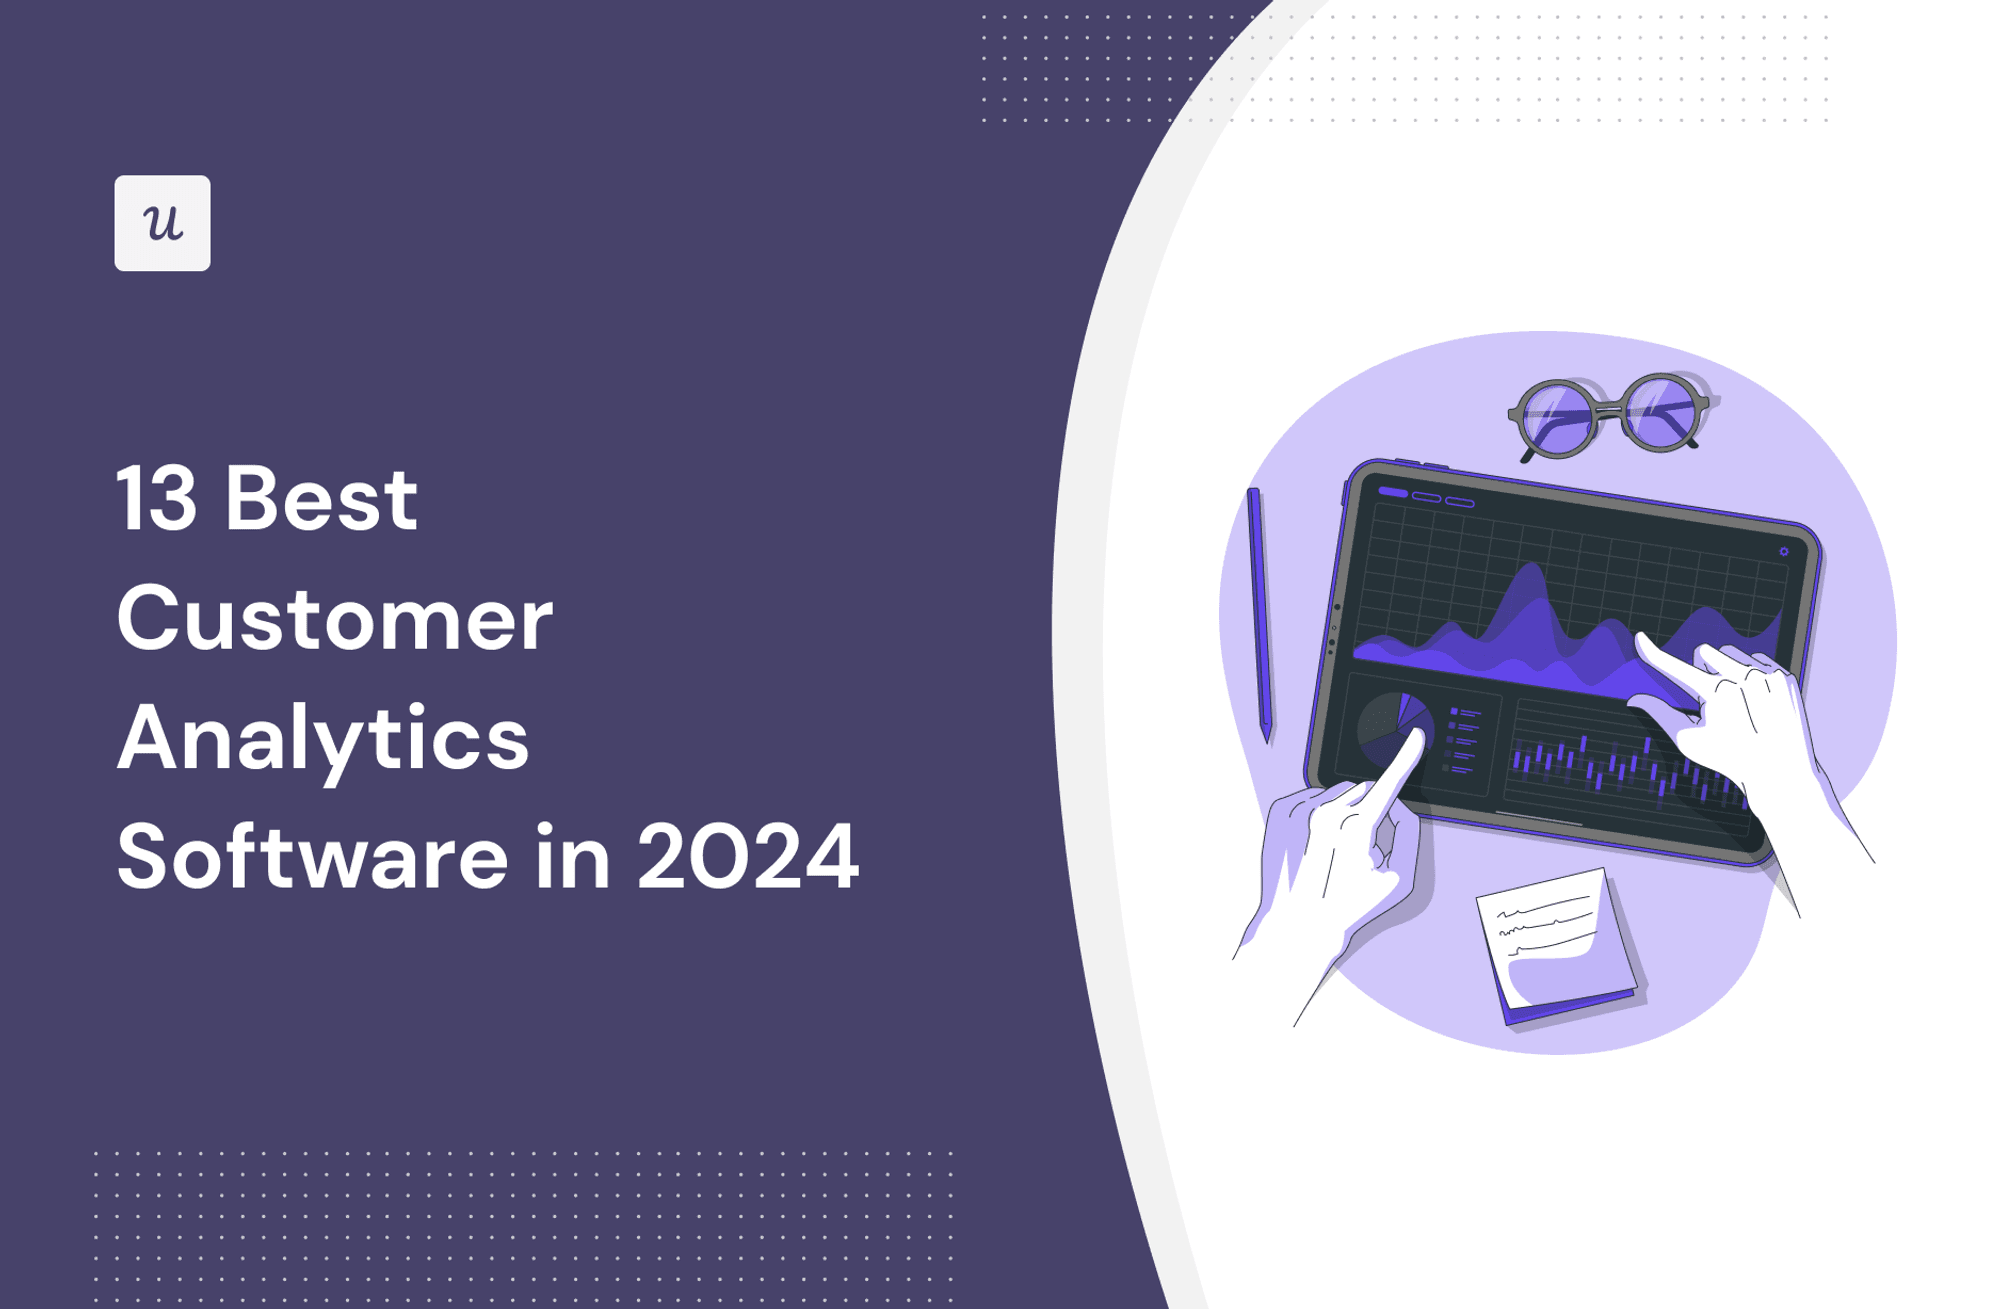 13 Best Customer Analytics Software in 2024 cover